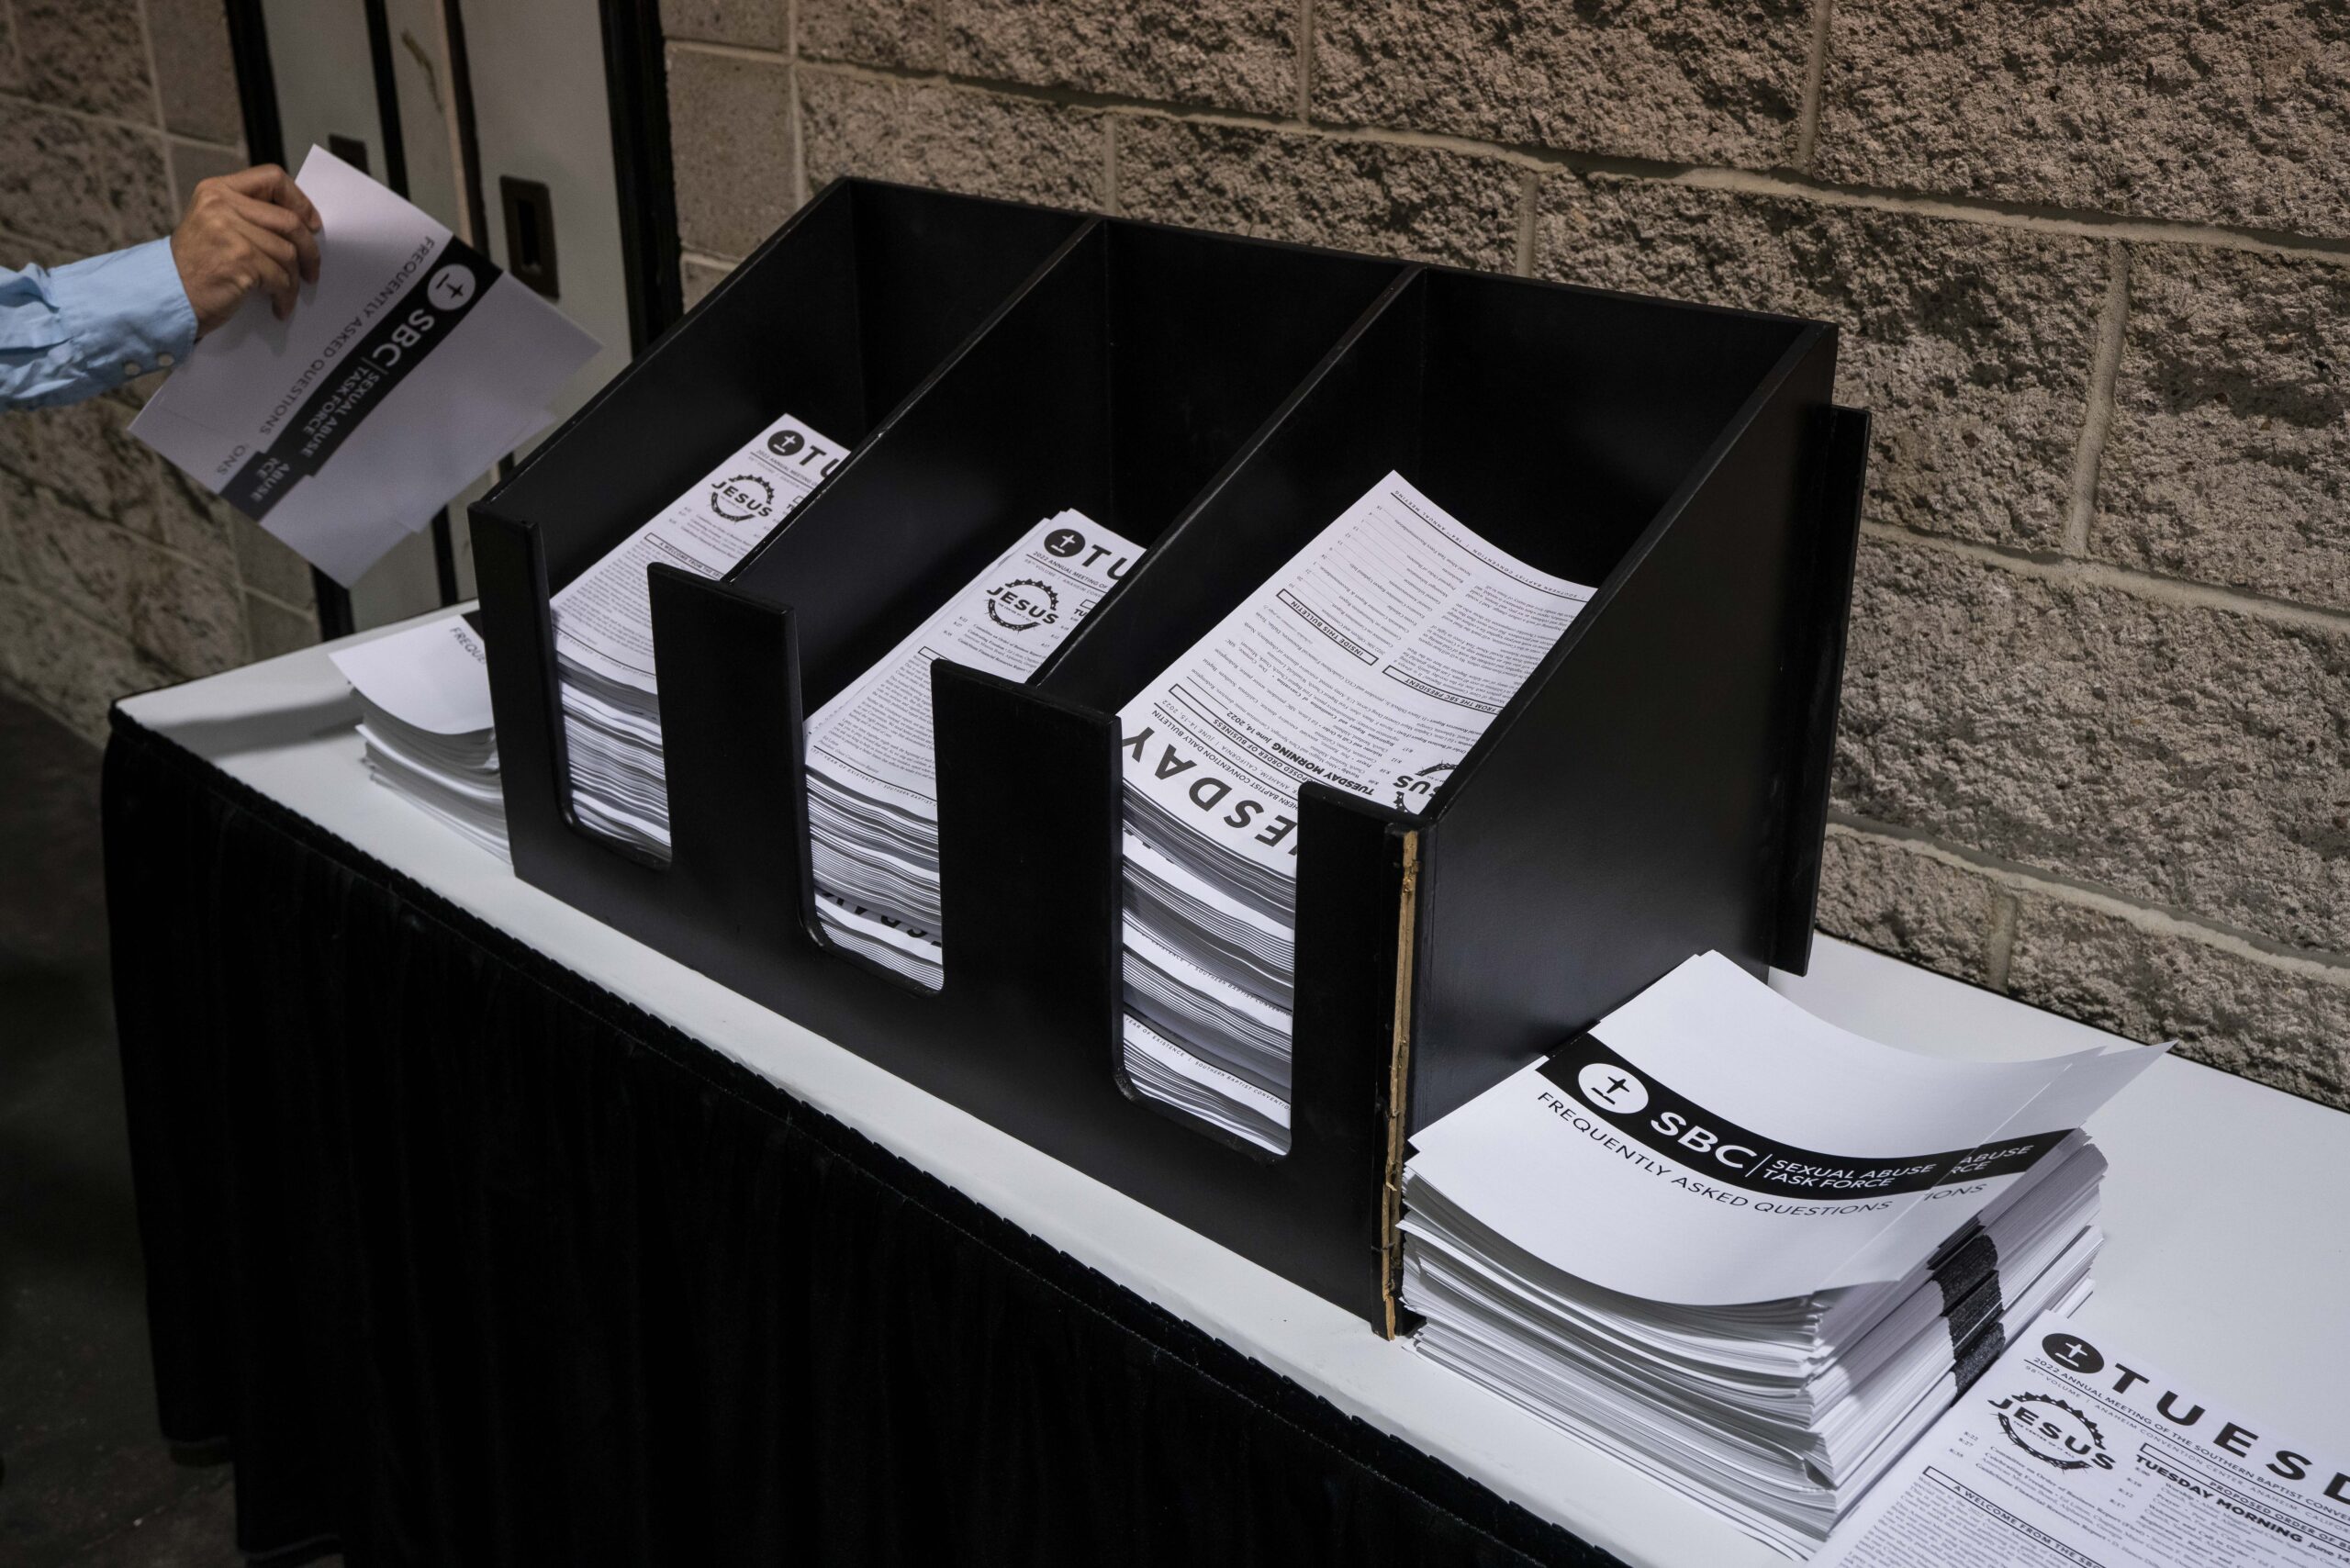 Sexual Abuse Taskforce FAQ sheets sit next to the daily bulletin during the Southern Baptist Convention held at the Anaheim Convention Center in Anaheim, California, on Tuesday, June 14, 2022. Photo by Justin L. Stewart/Religion News Service